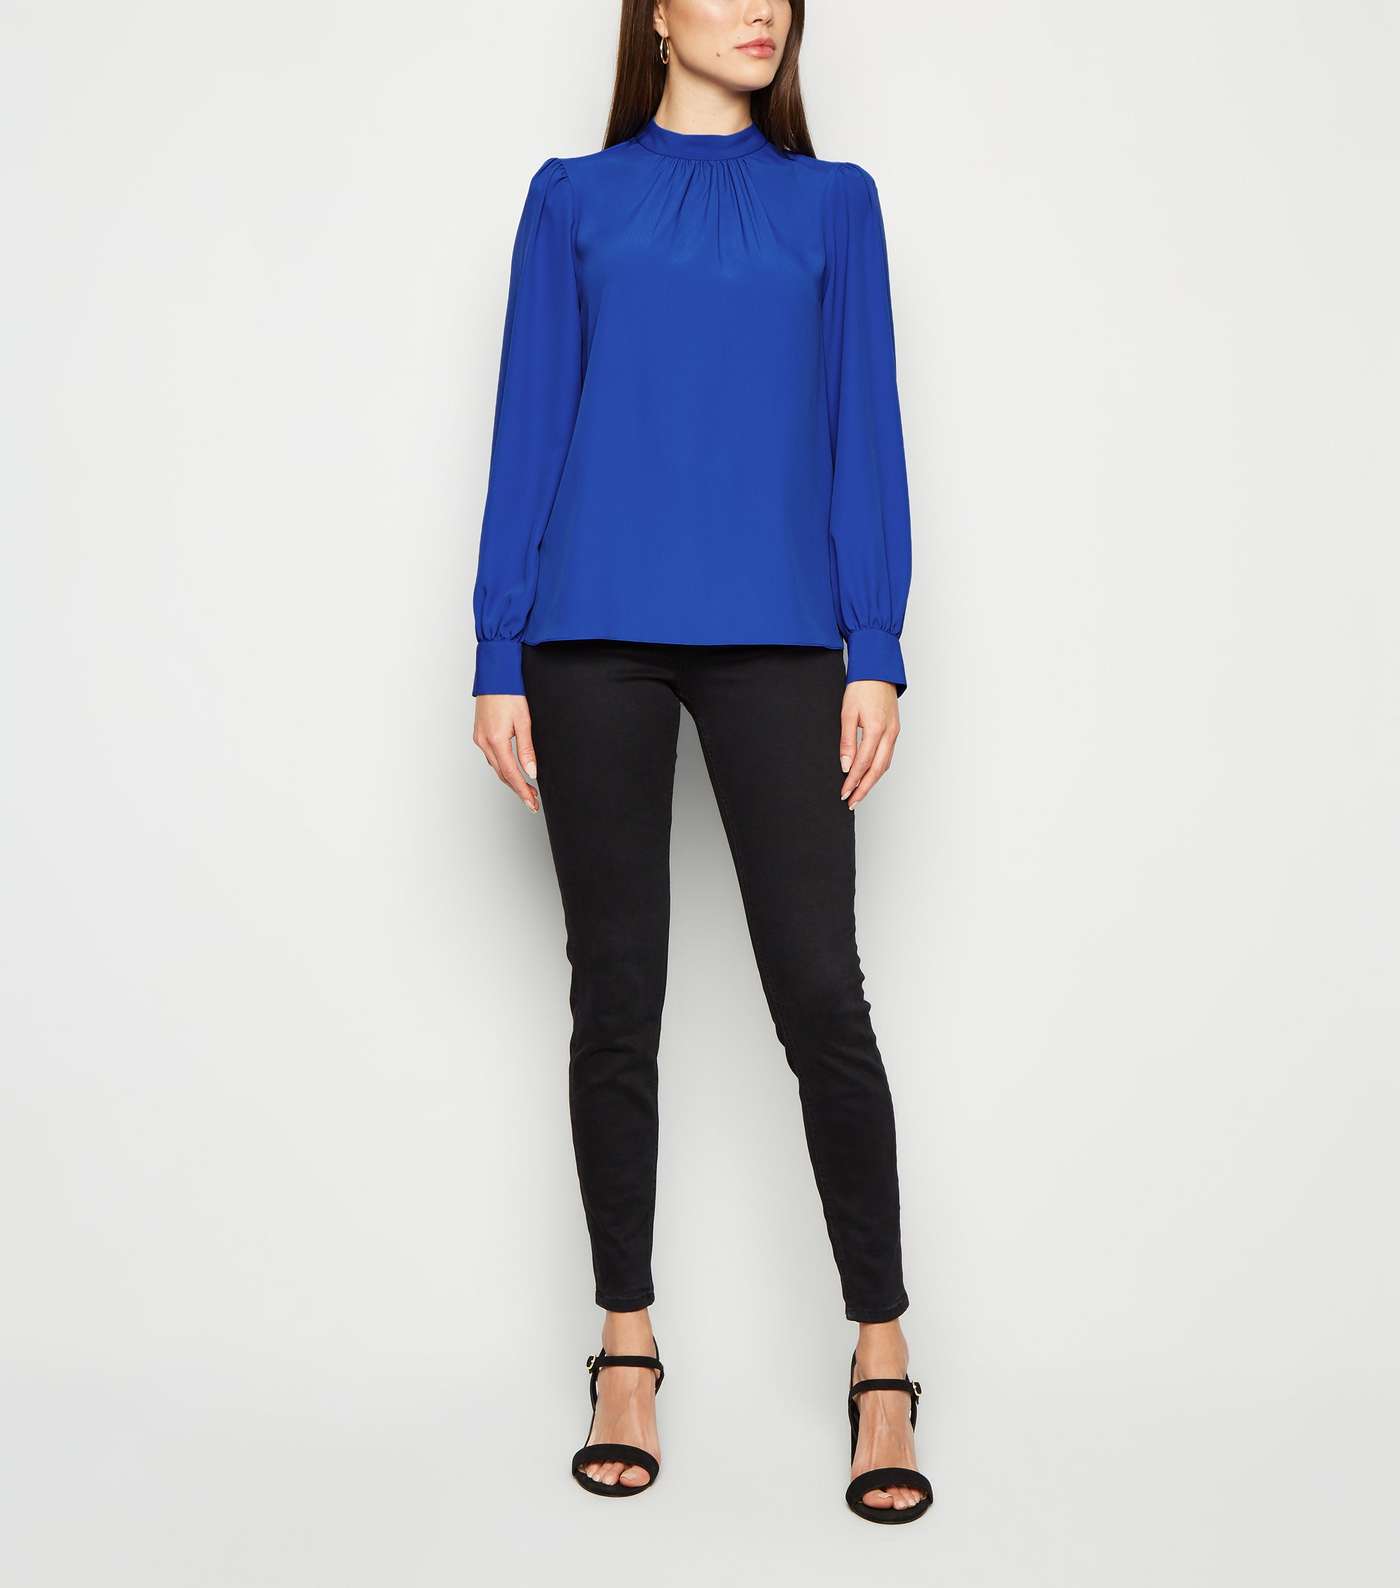 Bright Blue High Neck Blouse Image 2